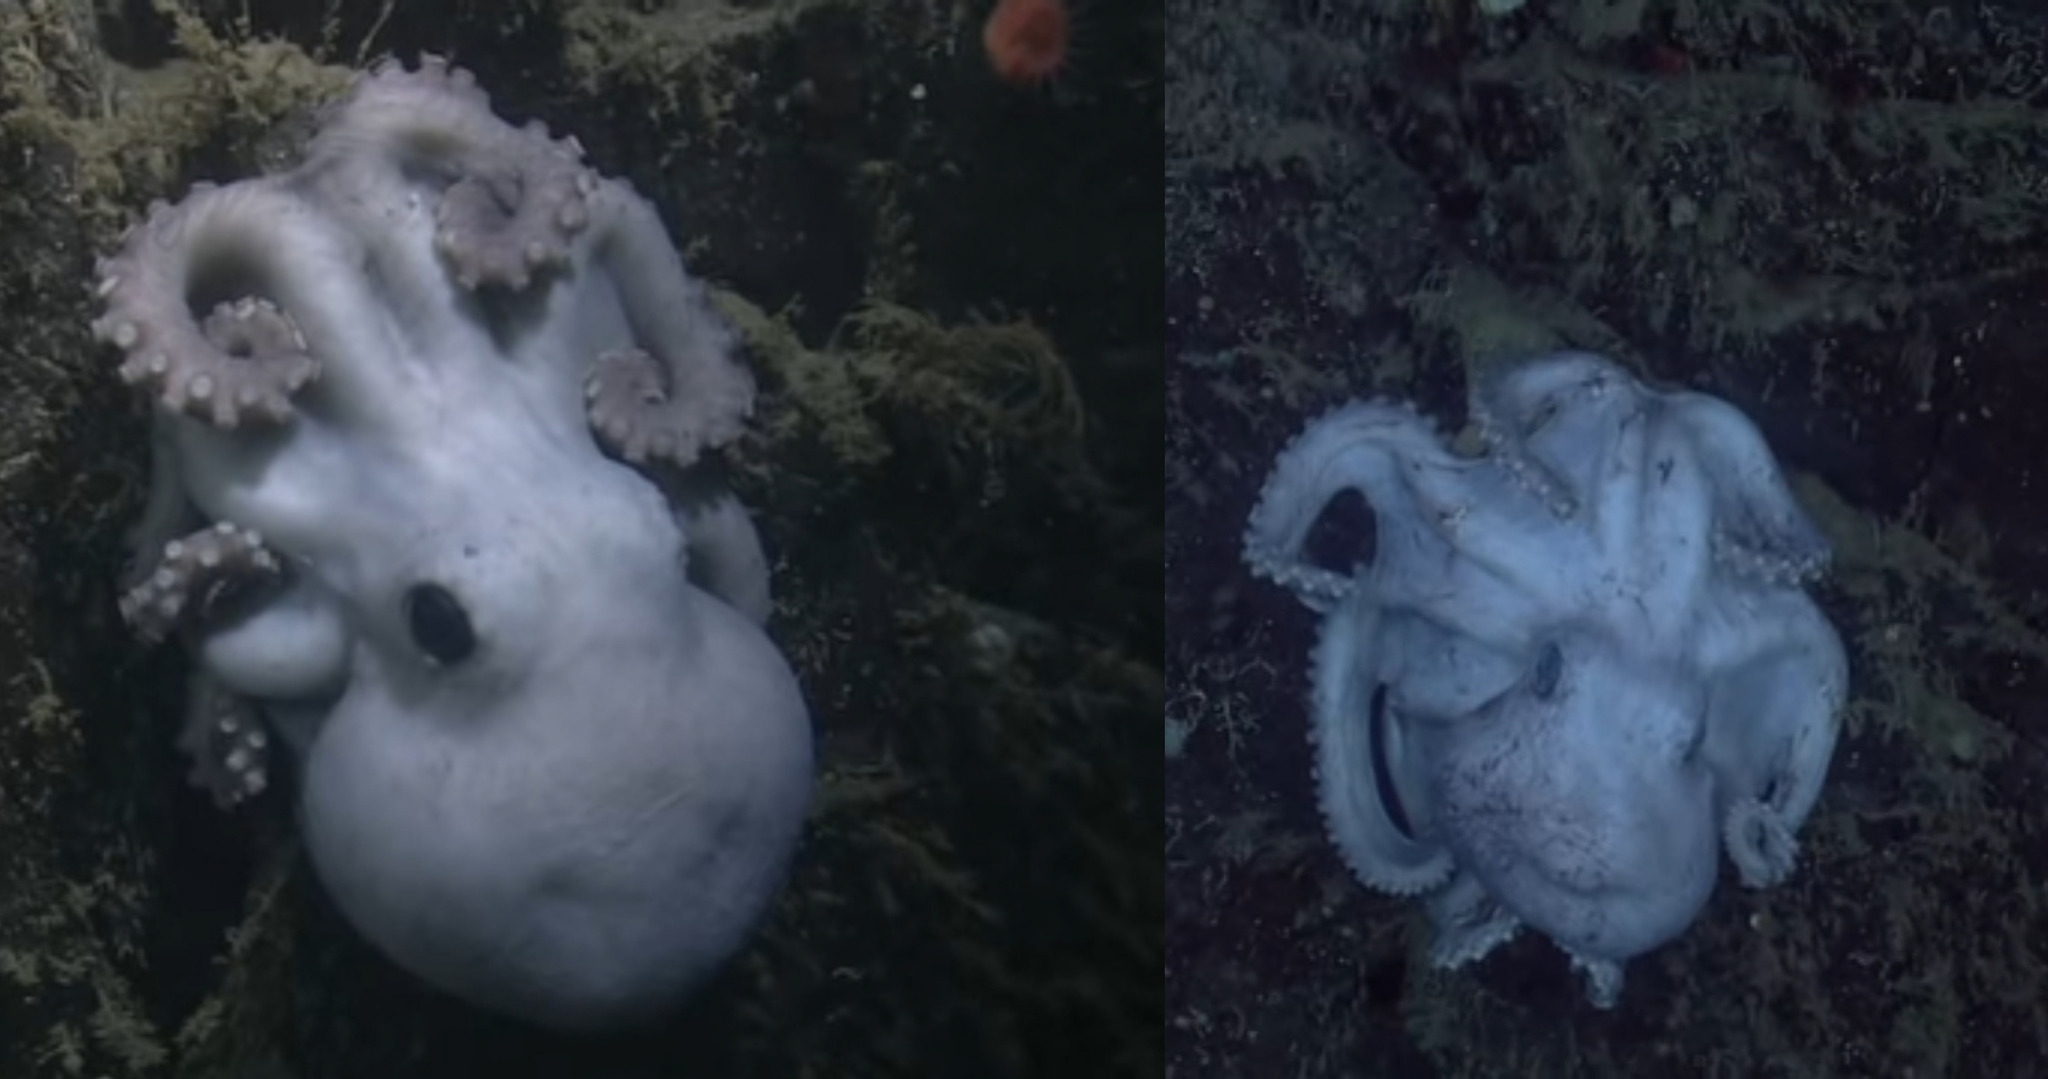 These octopus look like they have smiling faces - meme